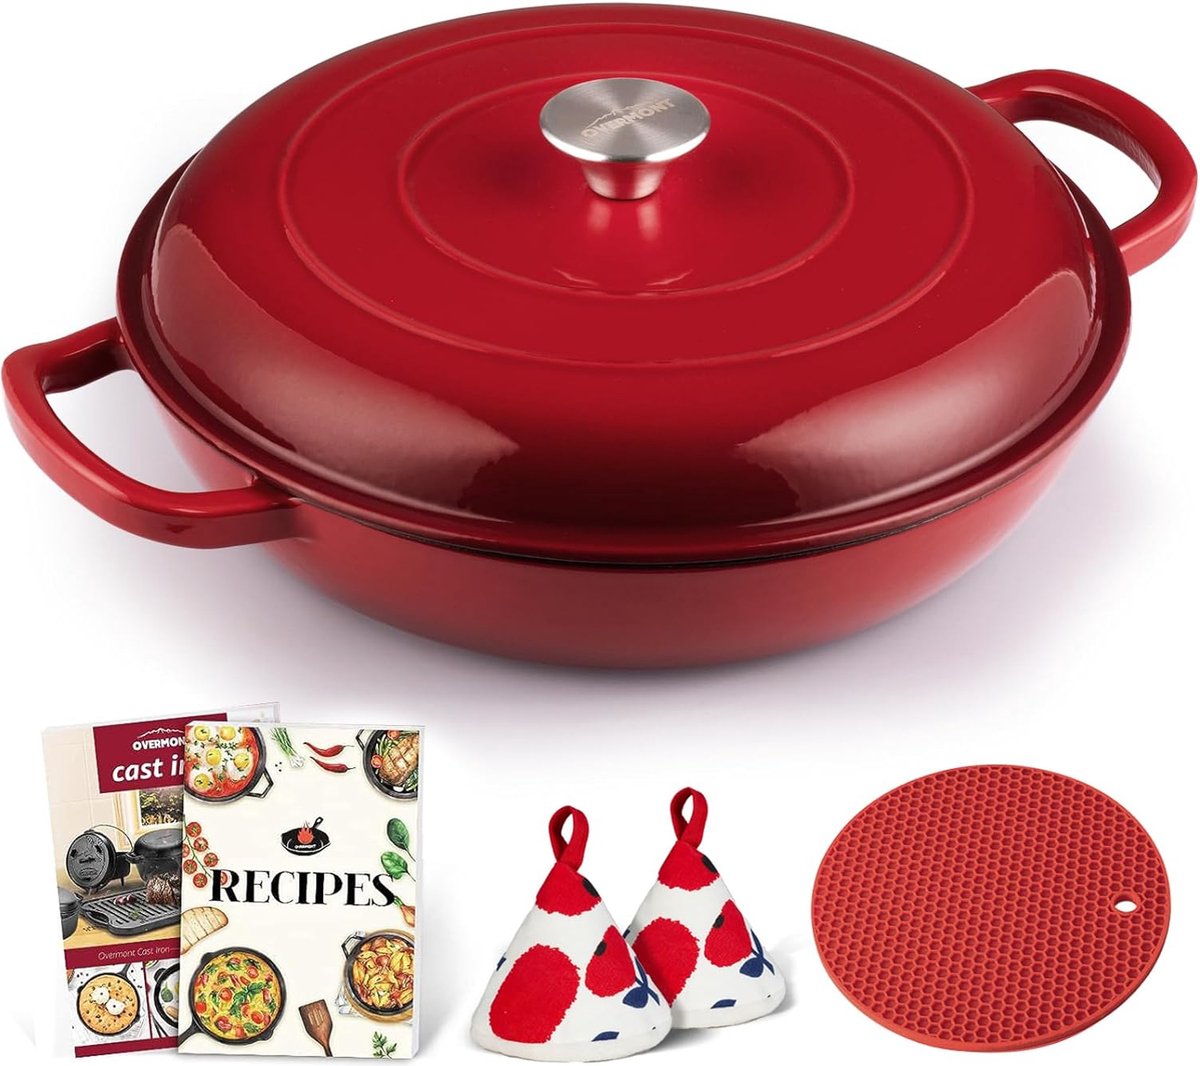 Cast Iron Casserole Pot 30 cm Enamel Roasting Dish with Lid Oven Safe with Cookbook for Kitchen Baking Braising Roasting Red